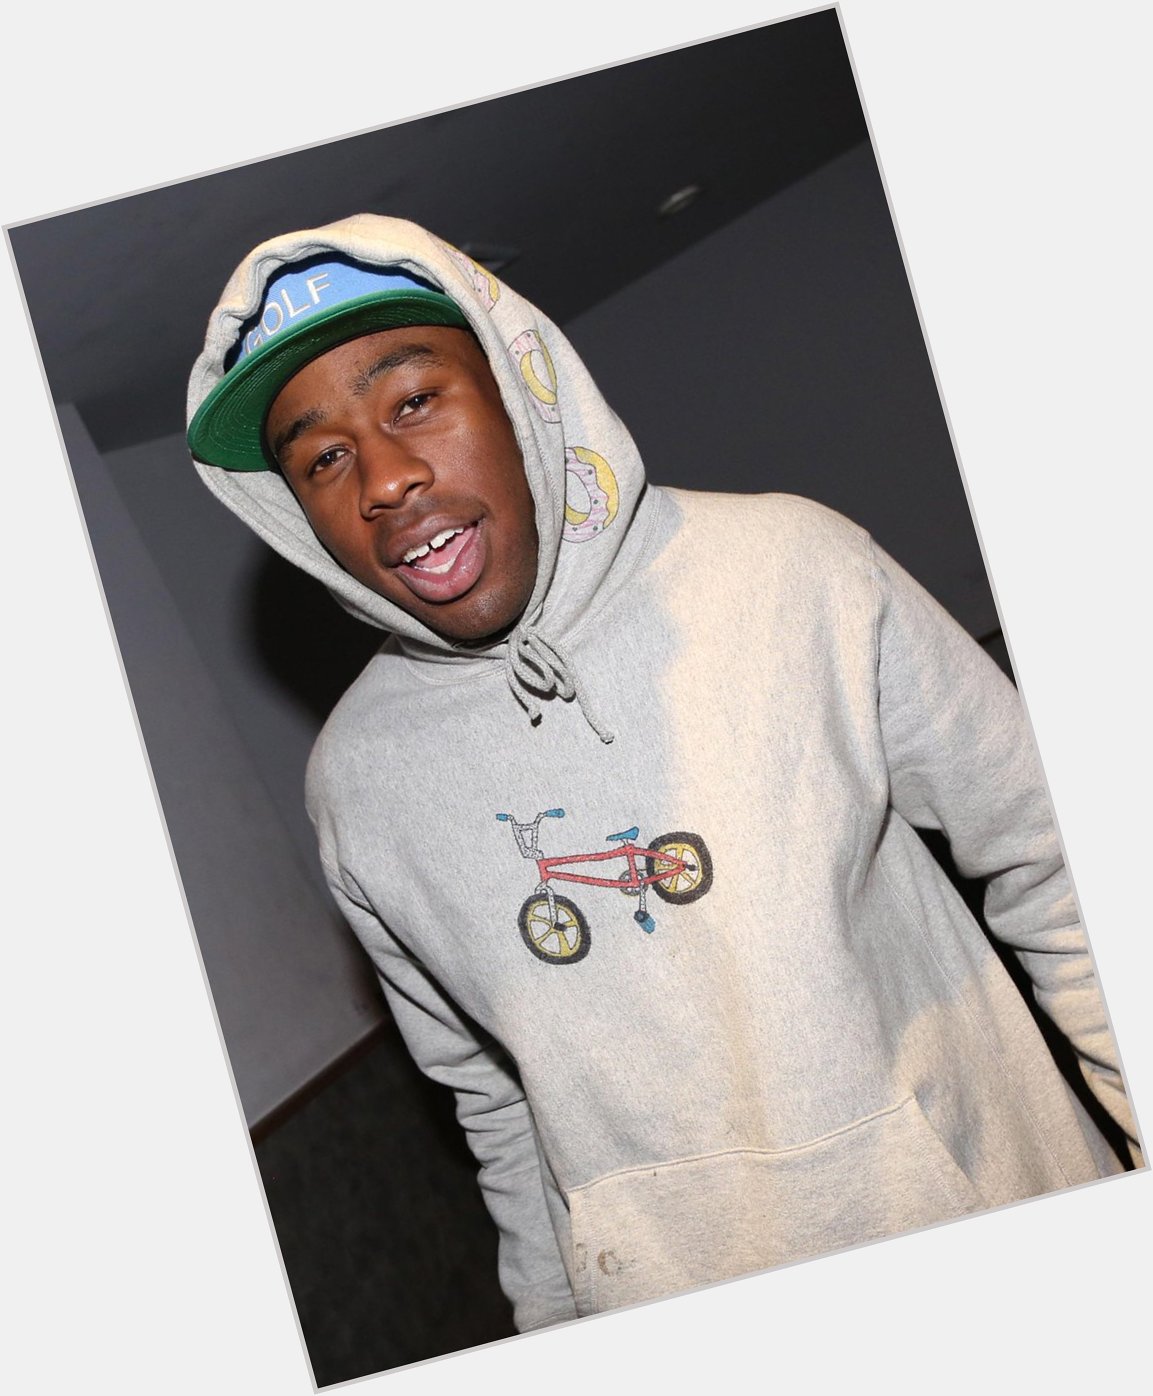 Happy 24th Birthday to Tyler The Creator!

He won an MTV Video Music Award for Best New Artist in 2011. 